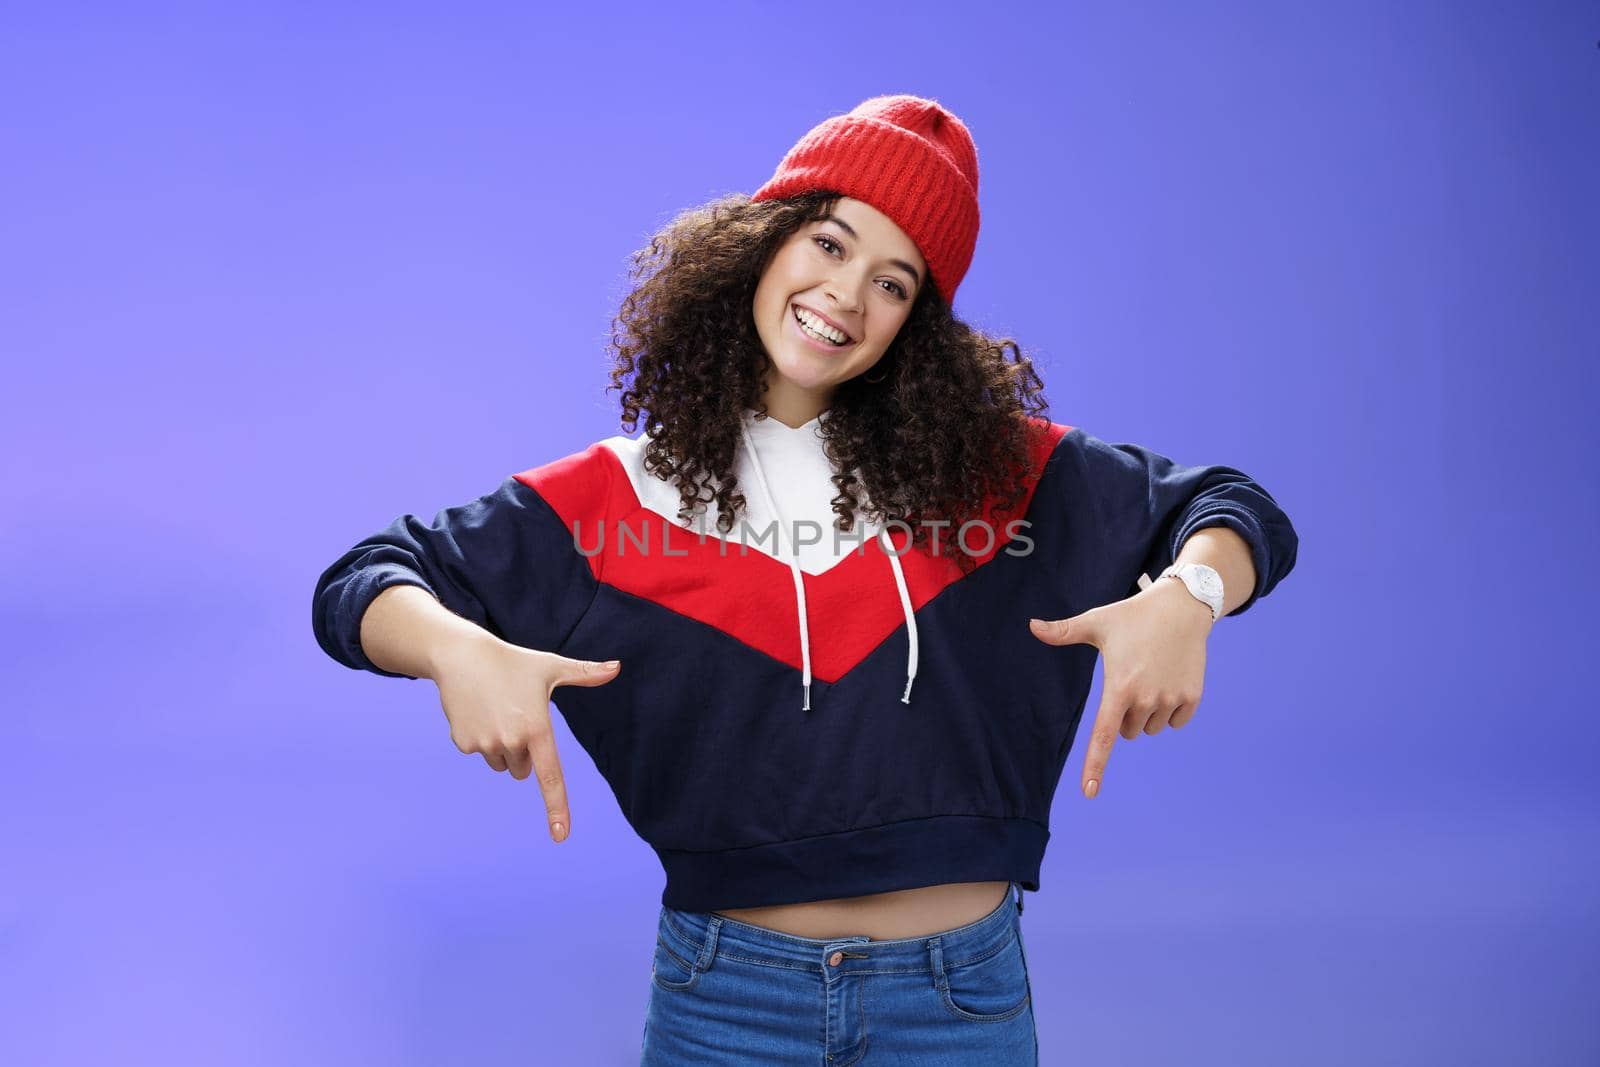 Waist-up shot of cool and stylish young woman with curly hair smiling flirty and joyful pointing down showing promotion as tilting head happily and posing over blue background in outdoor clothes by Benzoix